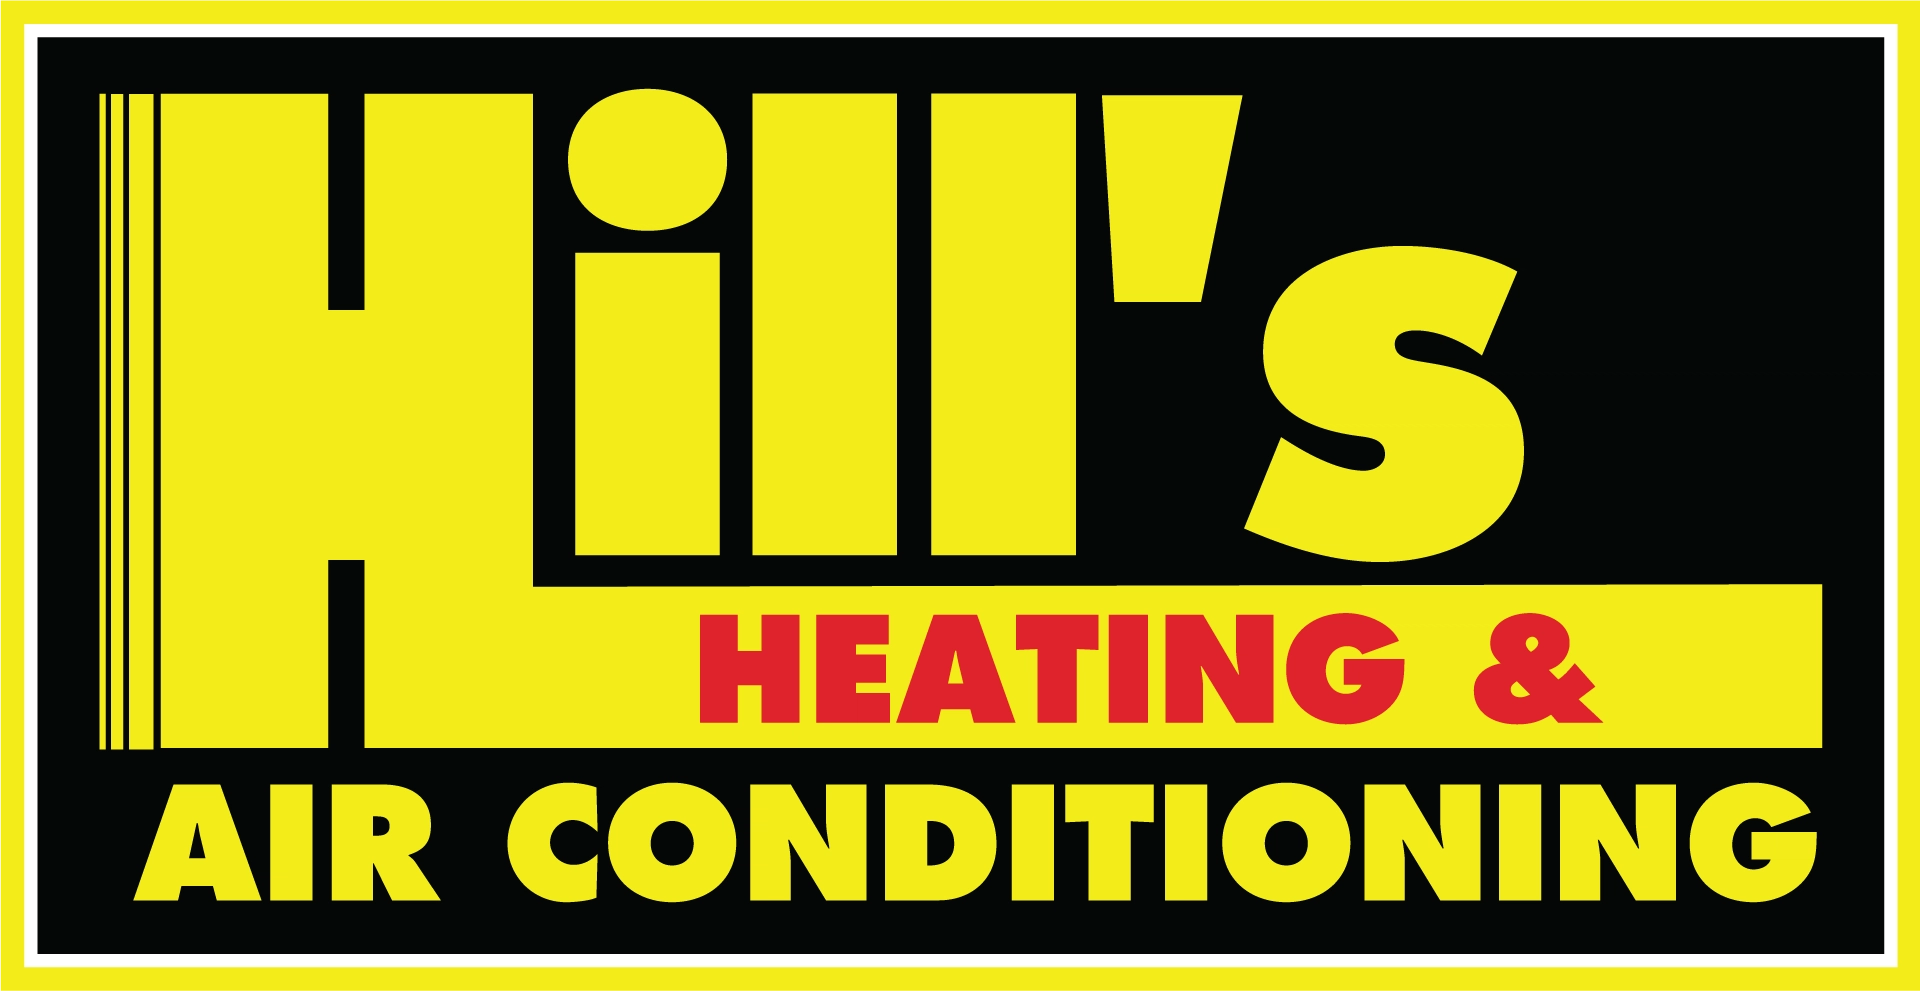 Hill's Heating & Air Conditioning Services Logo